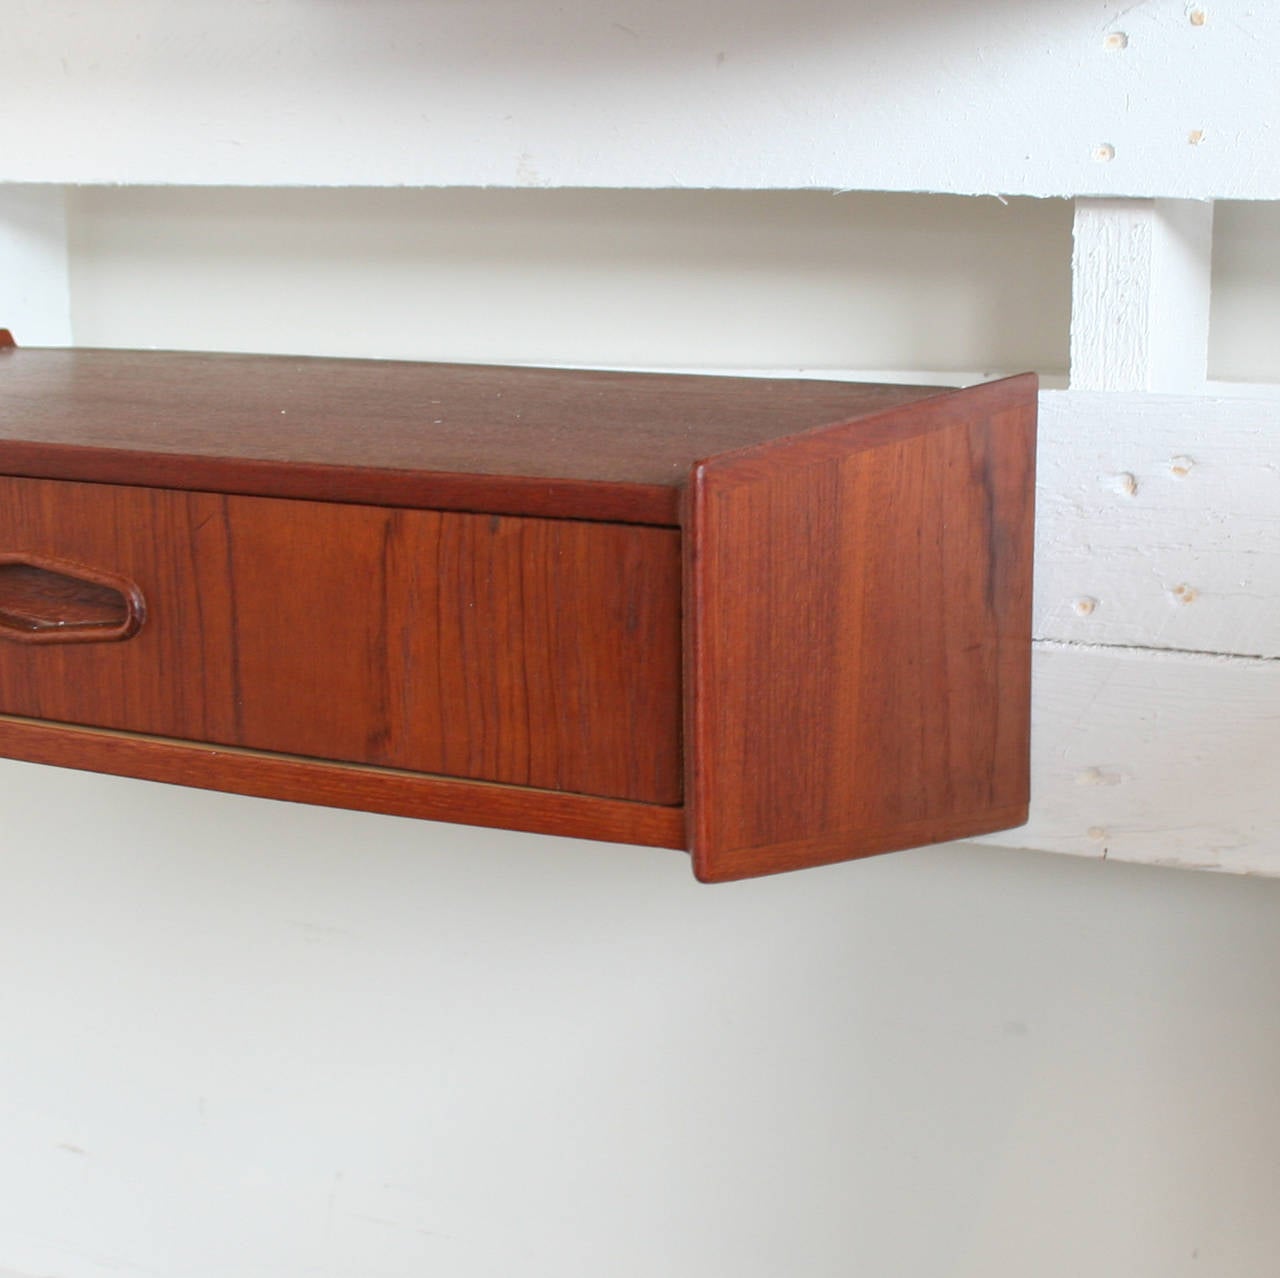 Pair of teak wall mounted drawers with solid teak diamond shaped pulls. Two available, sold individually.